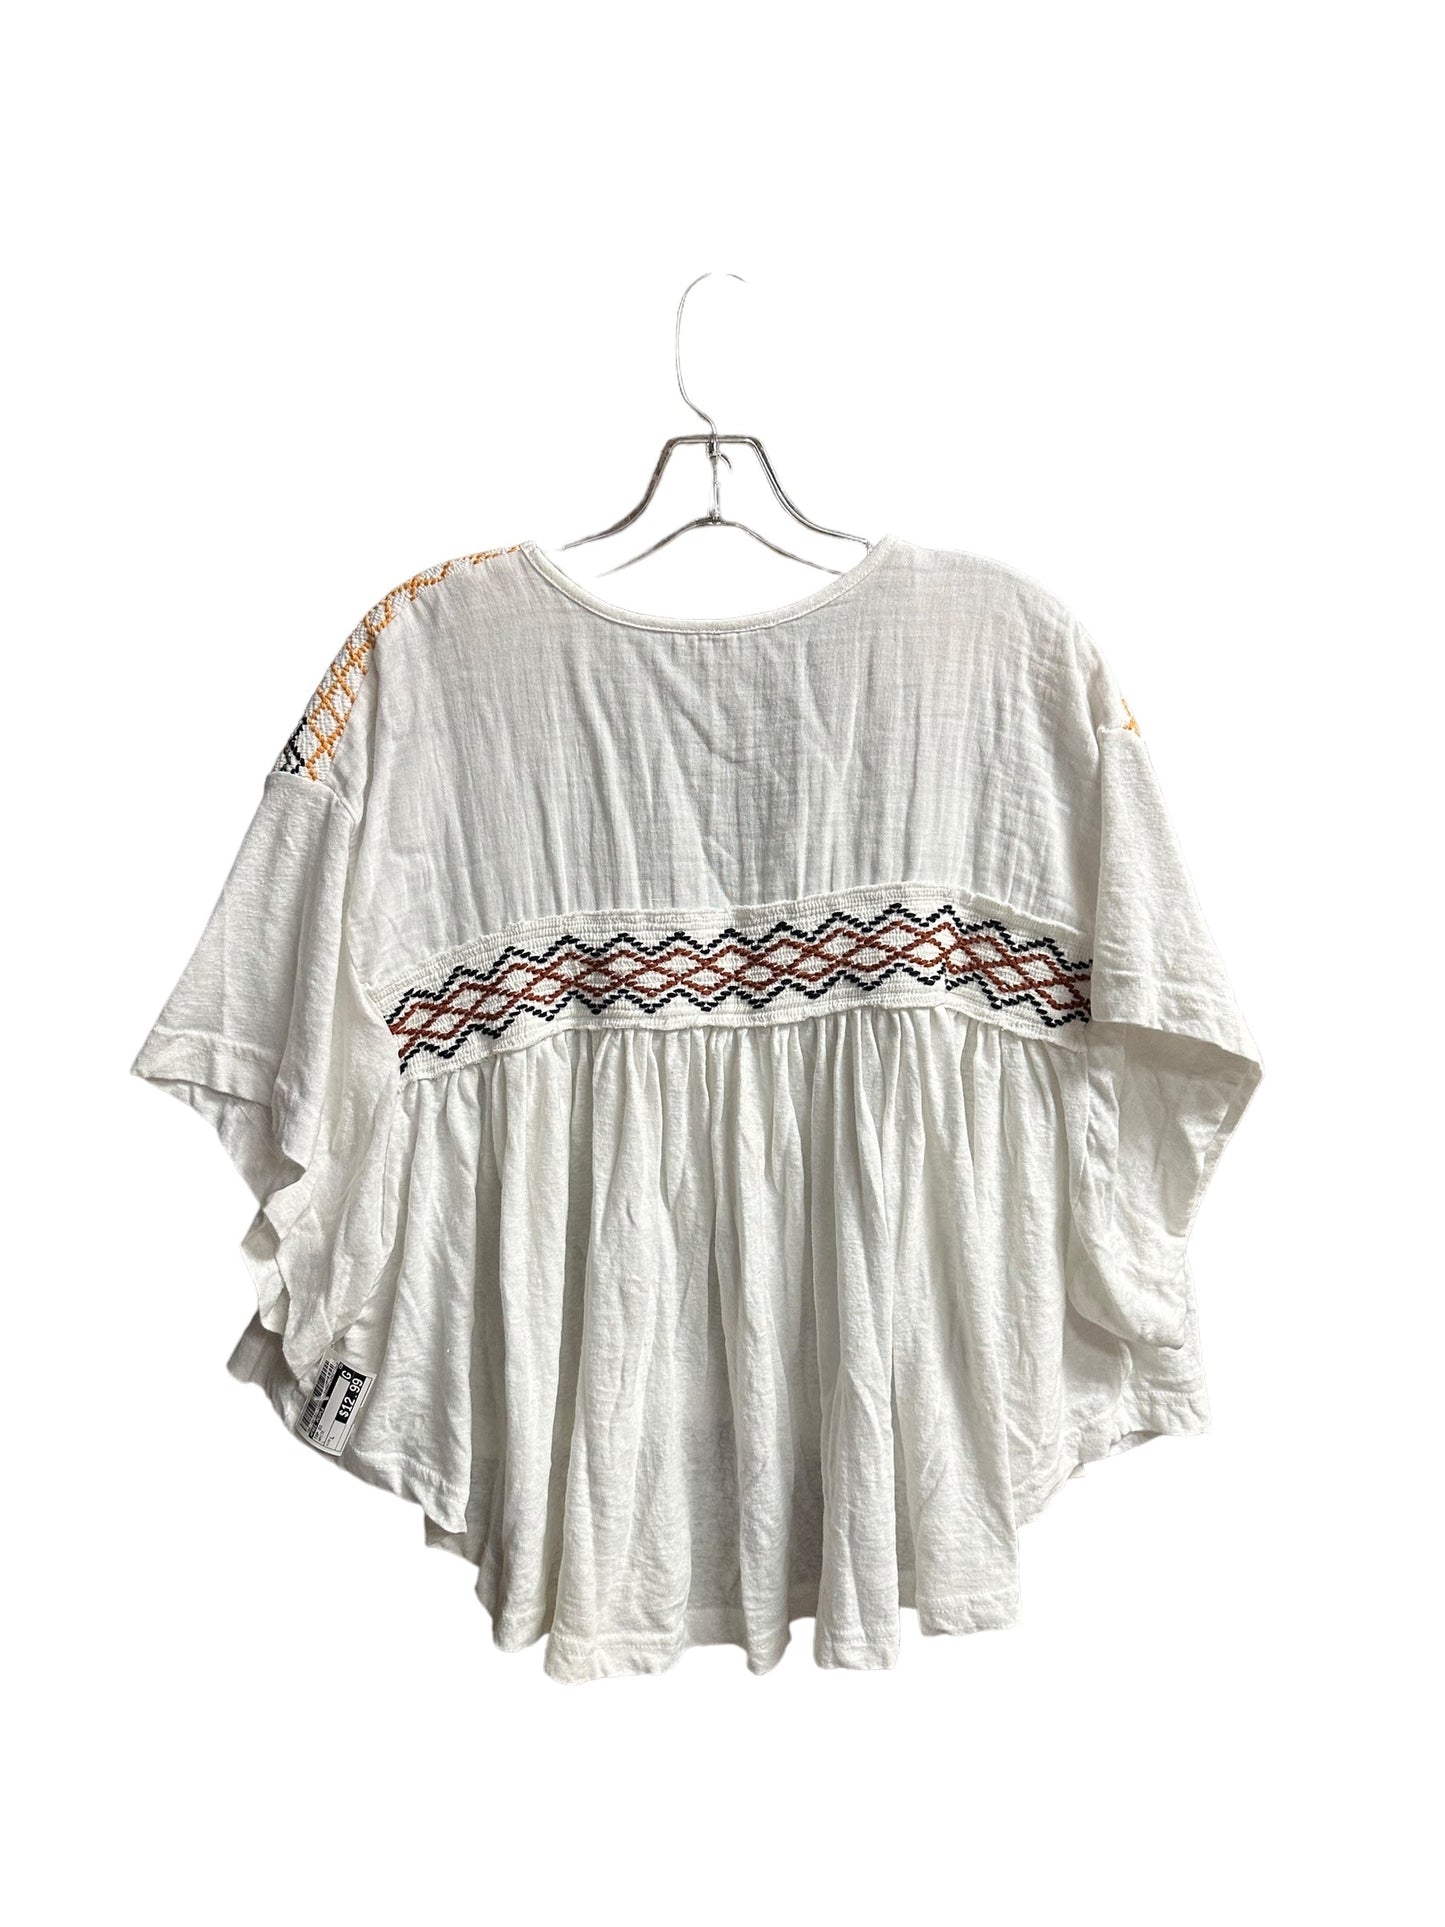 White Top Short Sleeve Free People, Size L